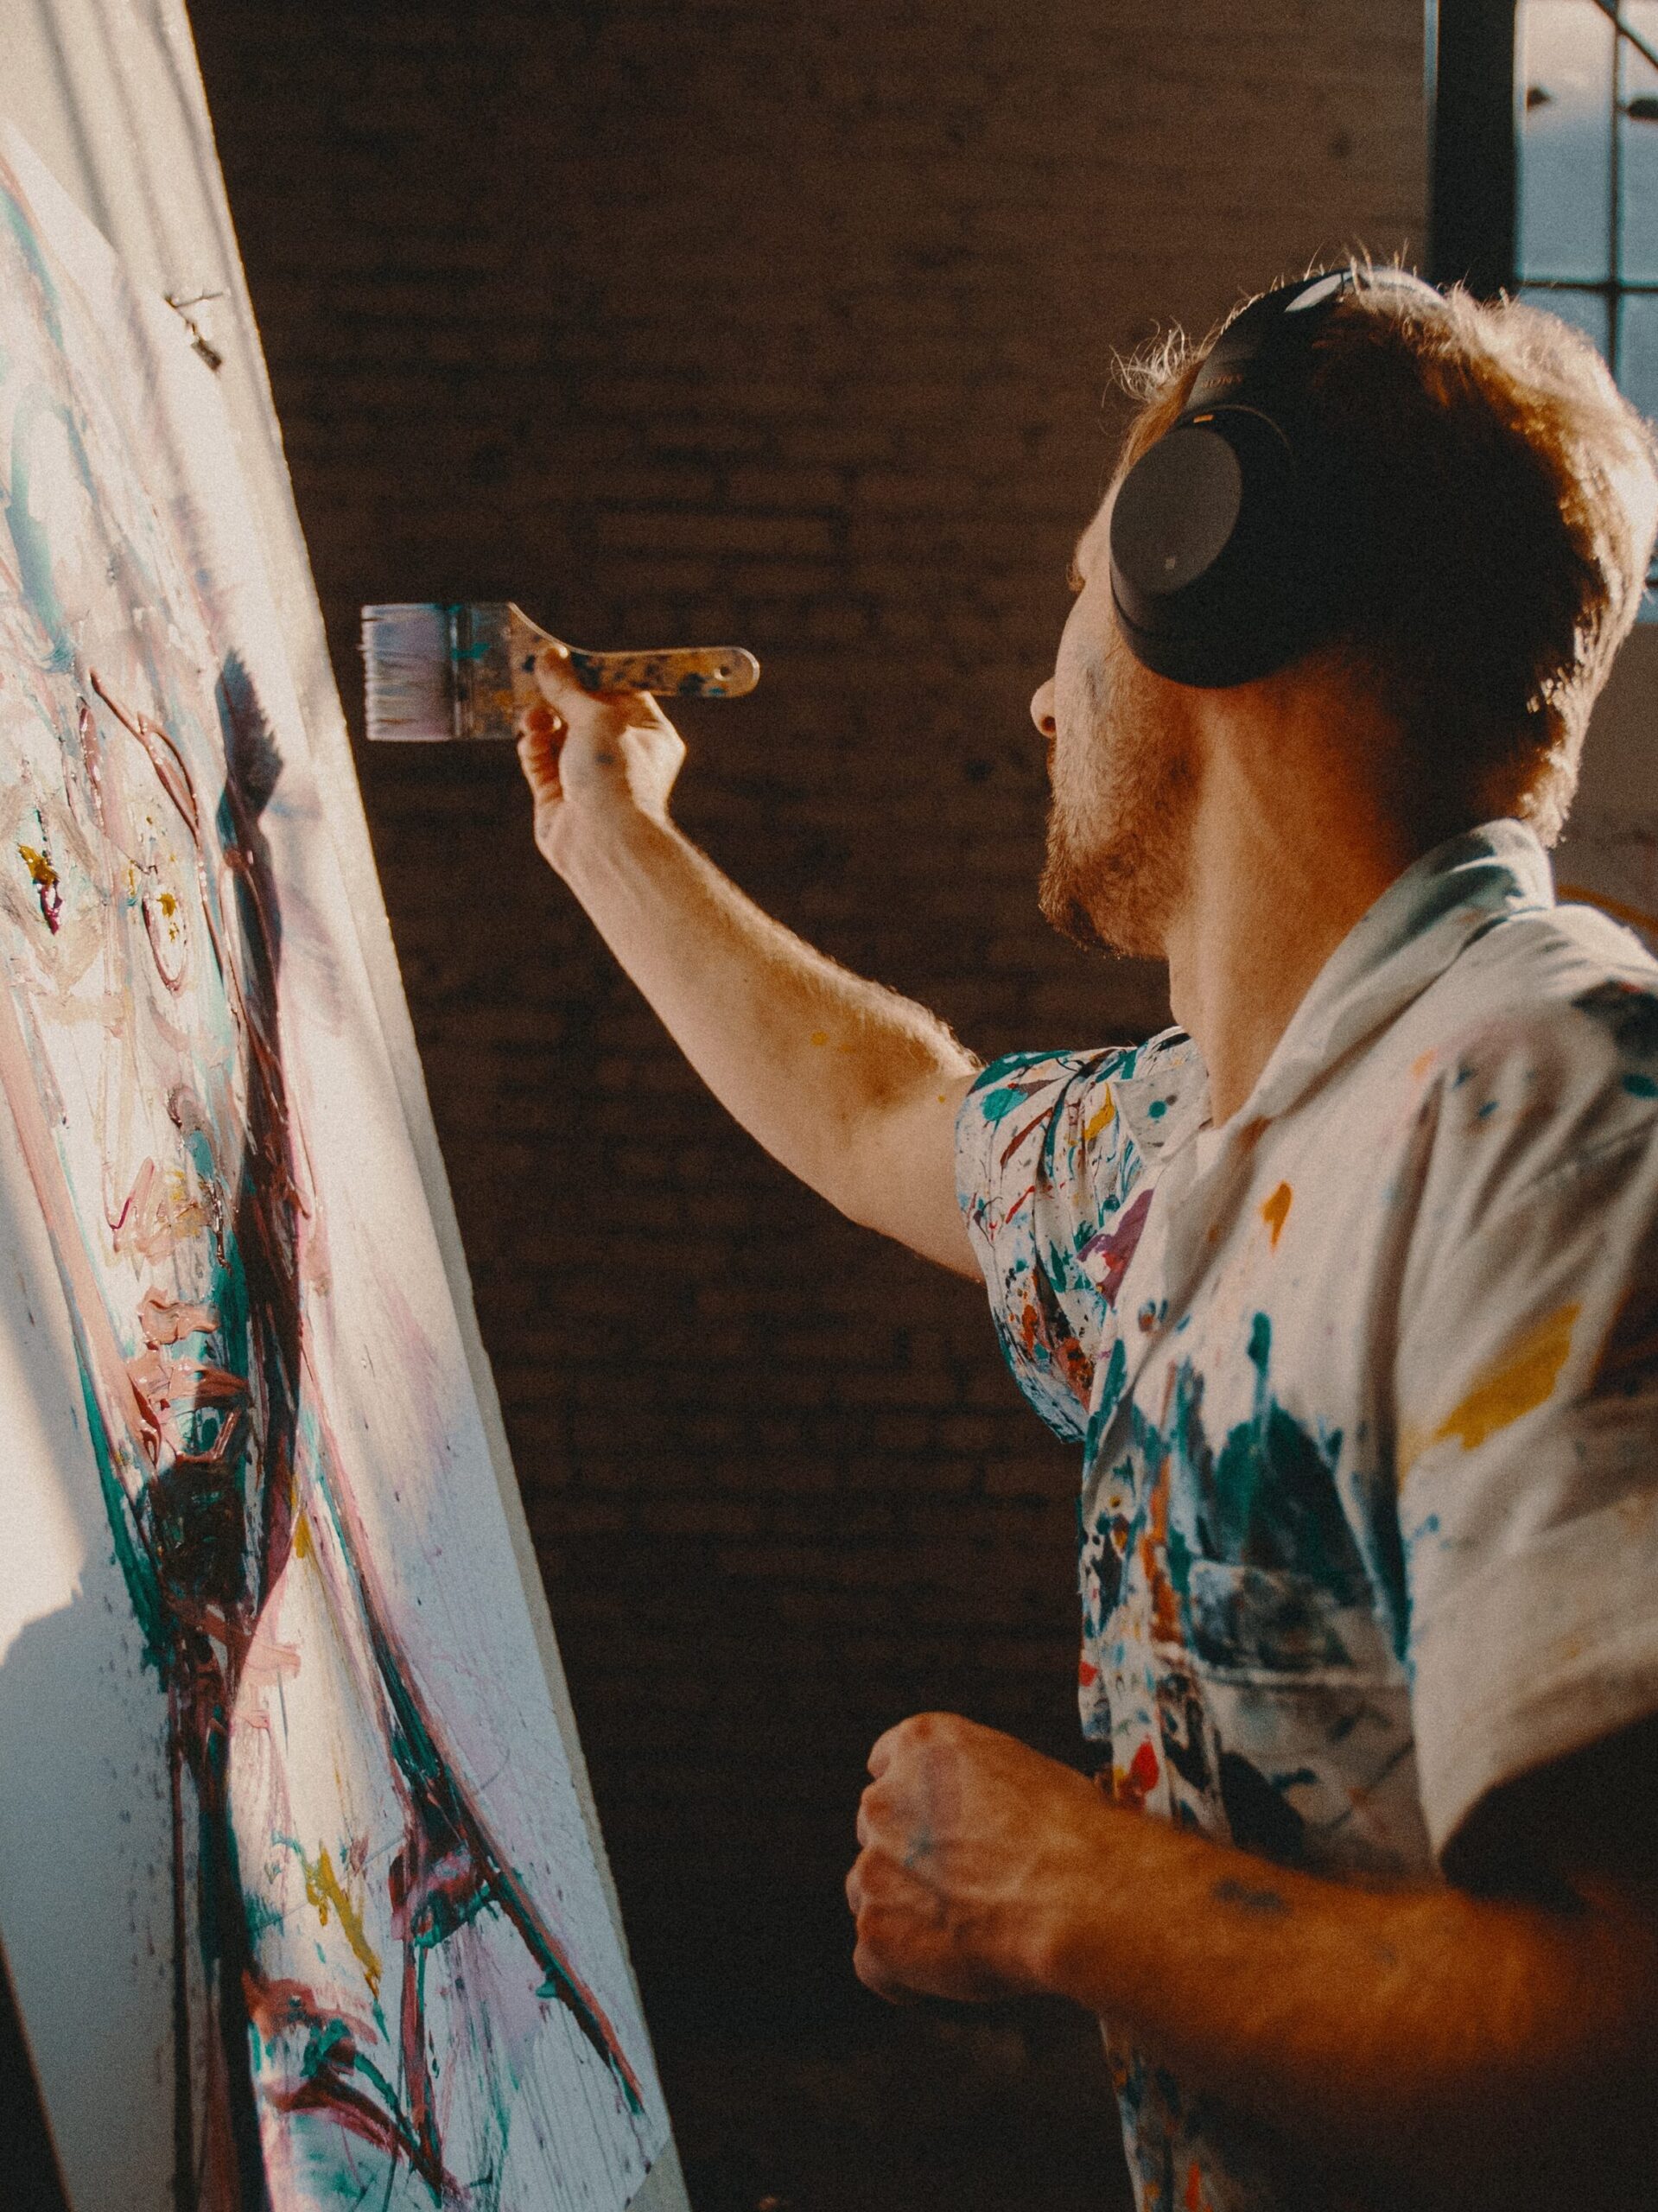 painting with music in our daily lives